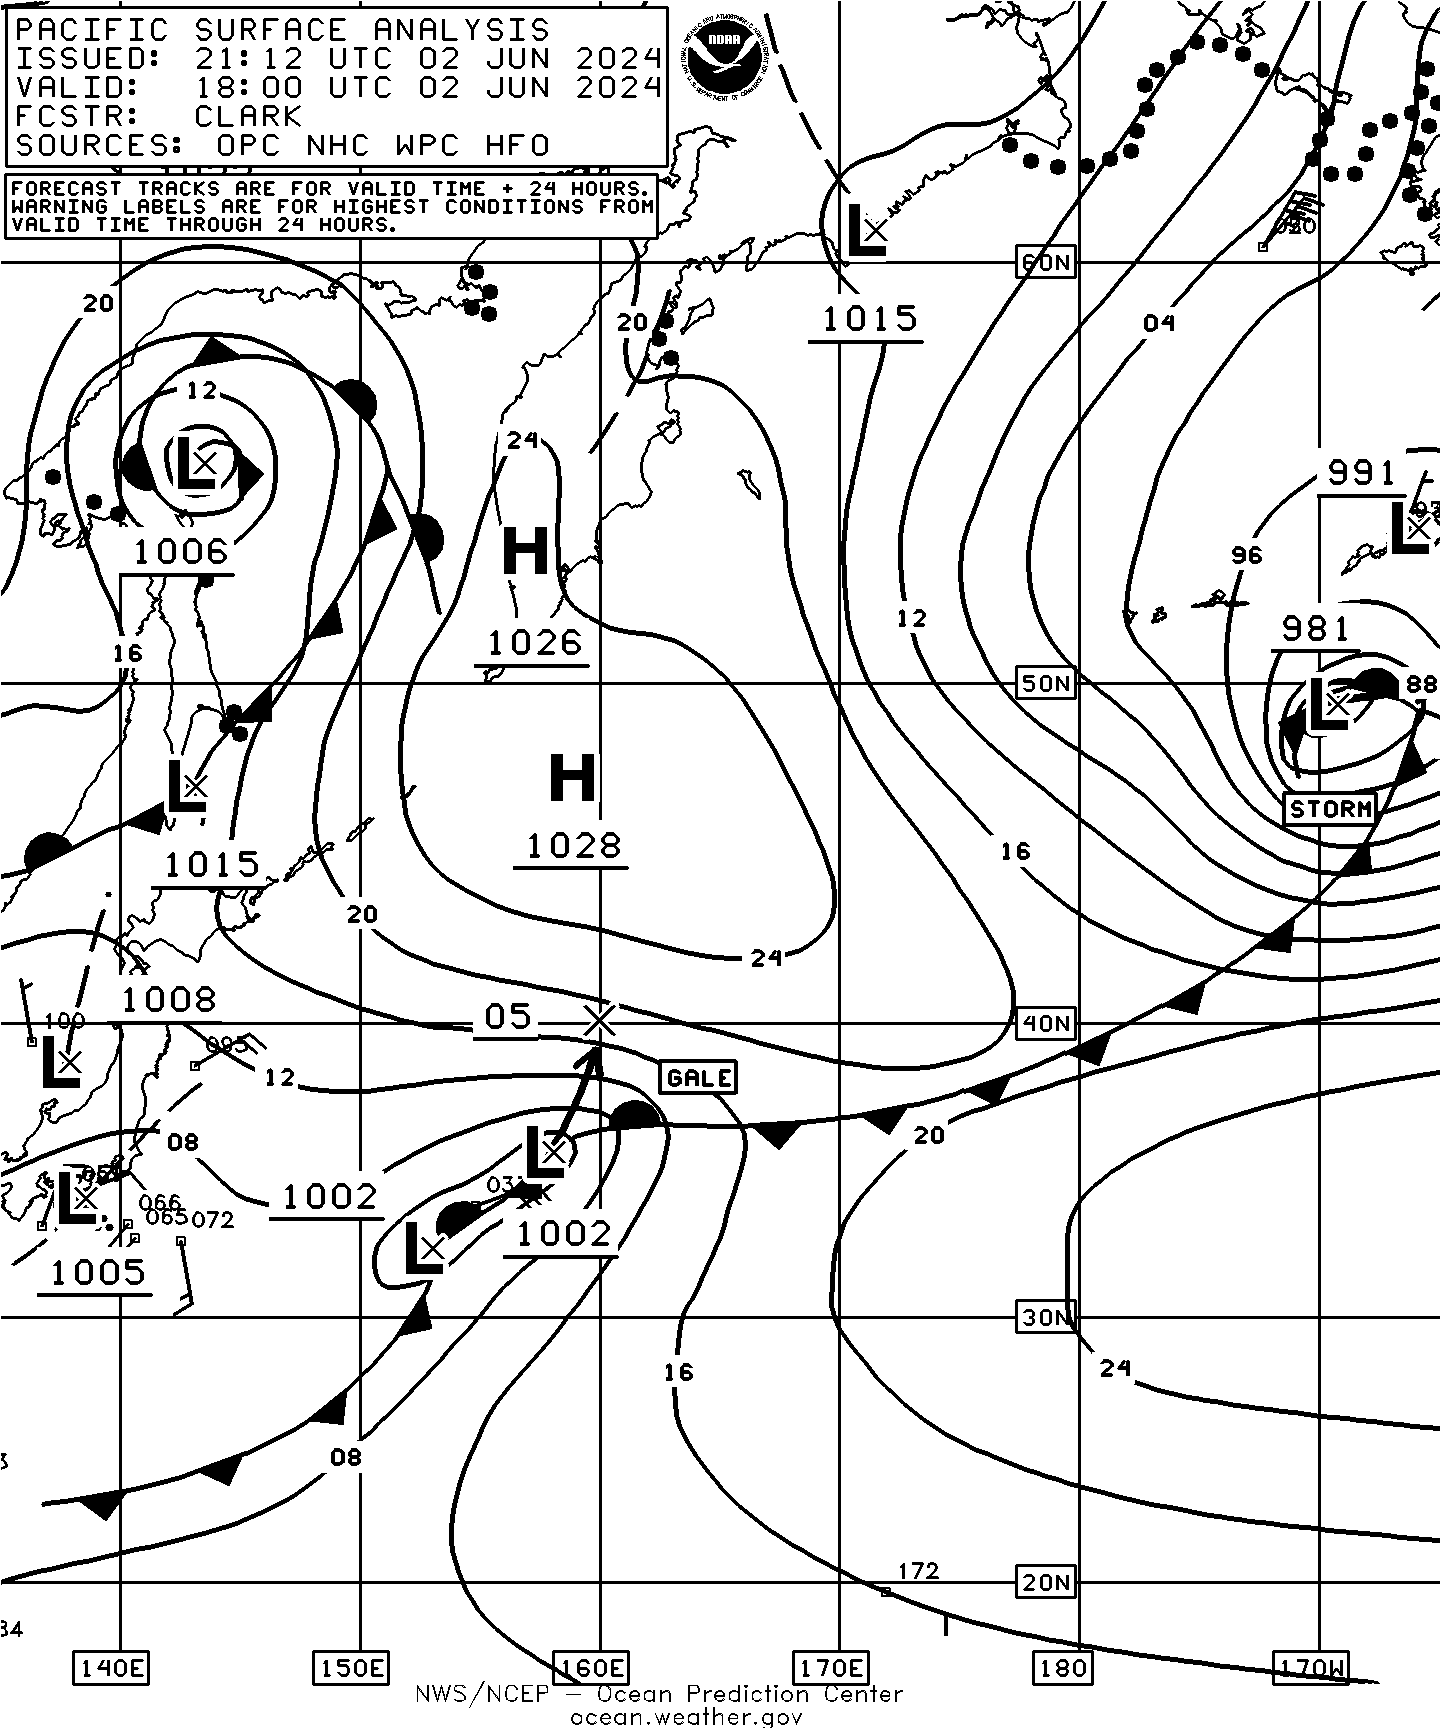 Image of West Pacific Surface Analysis